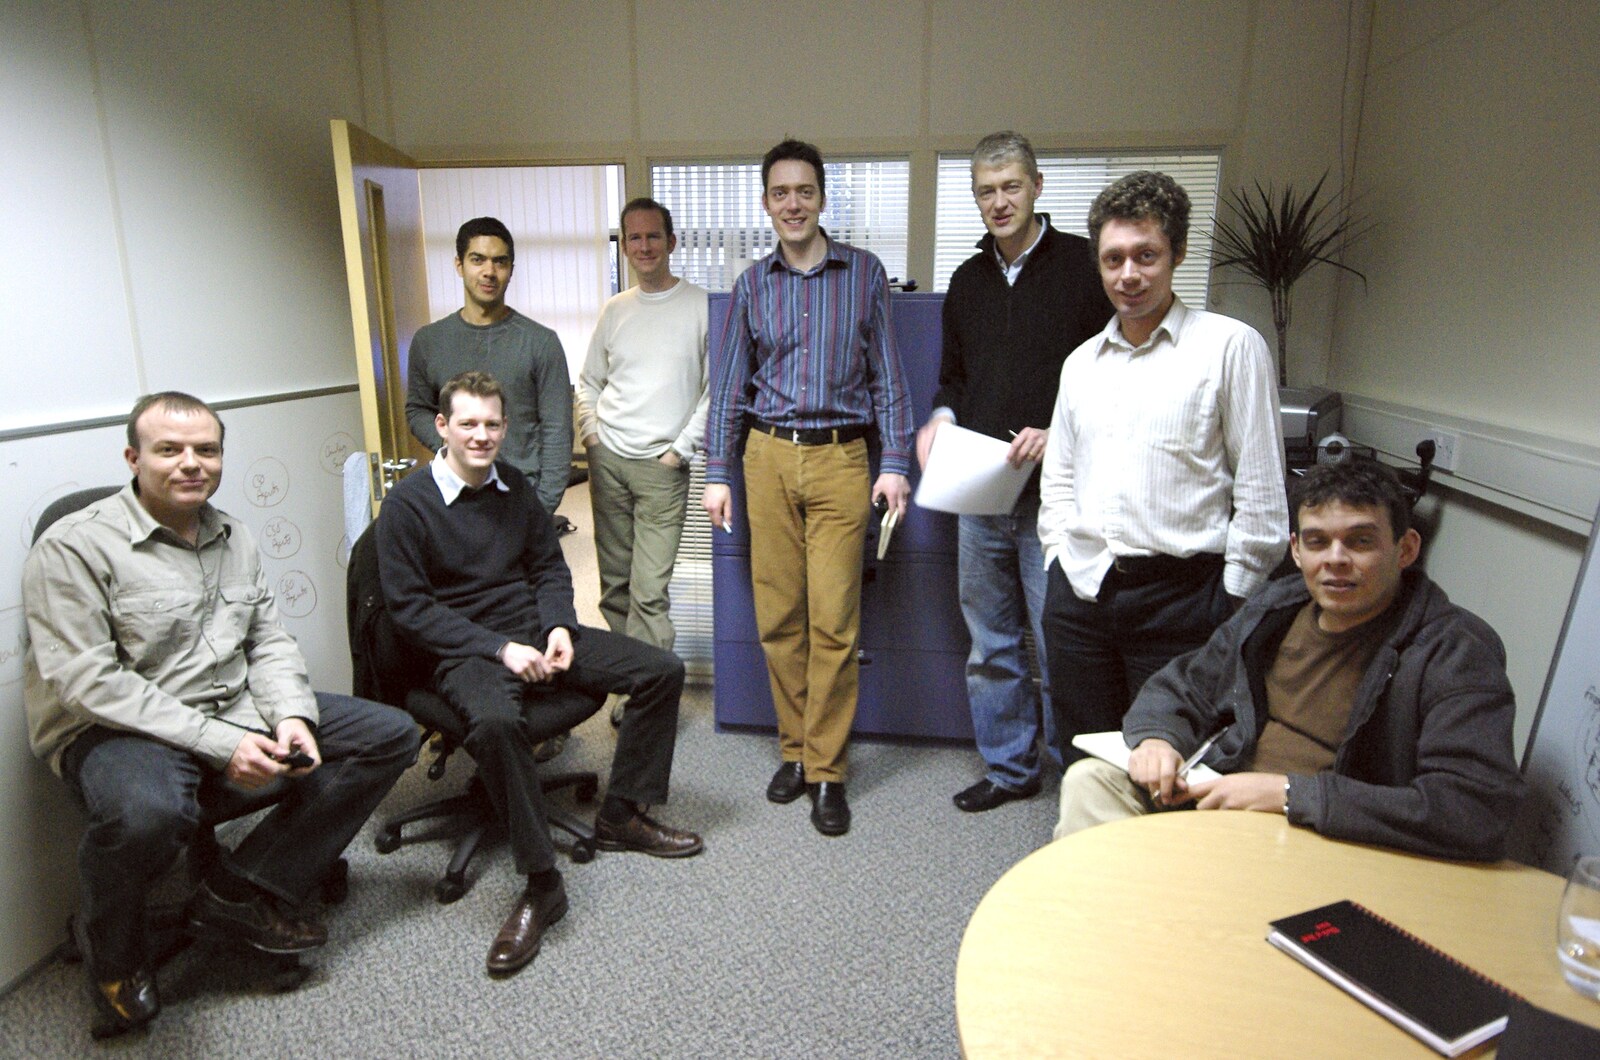 The Taptu start-up gang in the current office from Taptu: A New Start-up, and The BBs at the Apollo Rooms, Harleston - 3rd February 2007